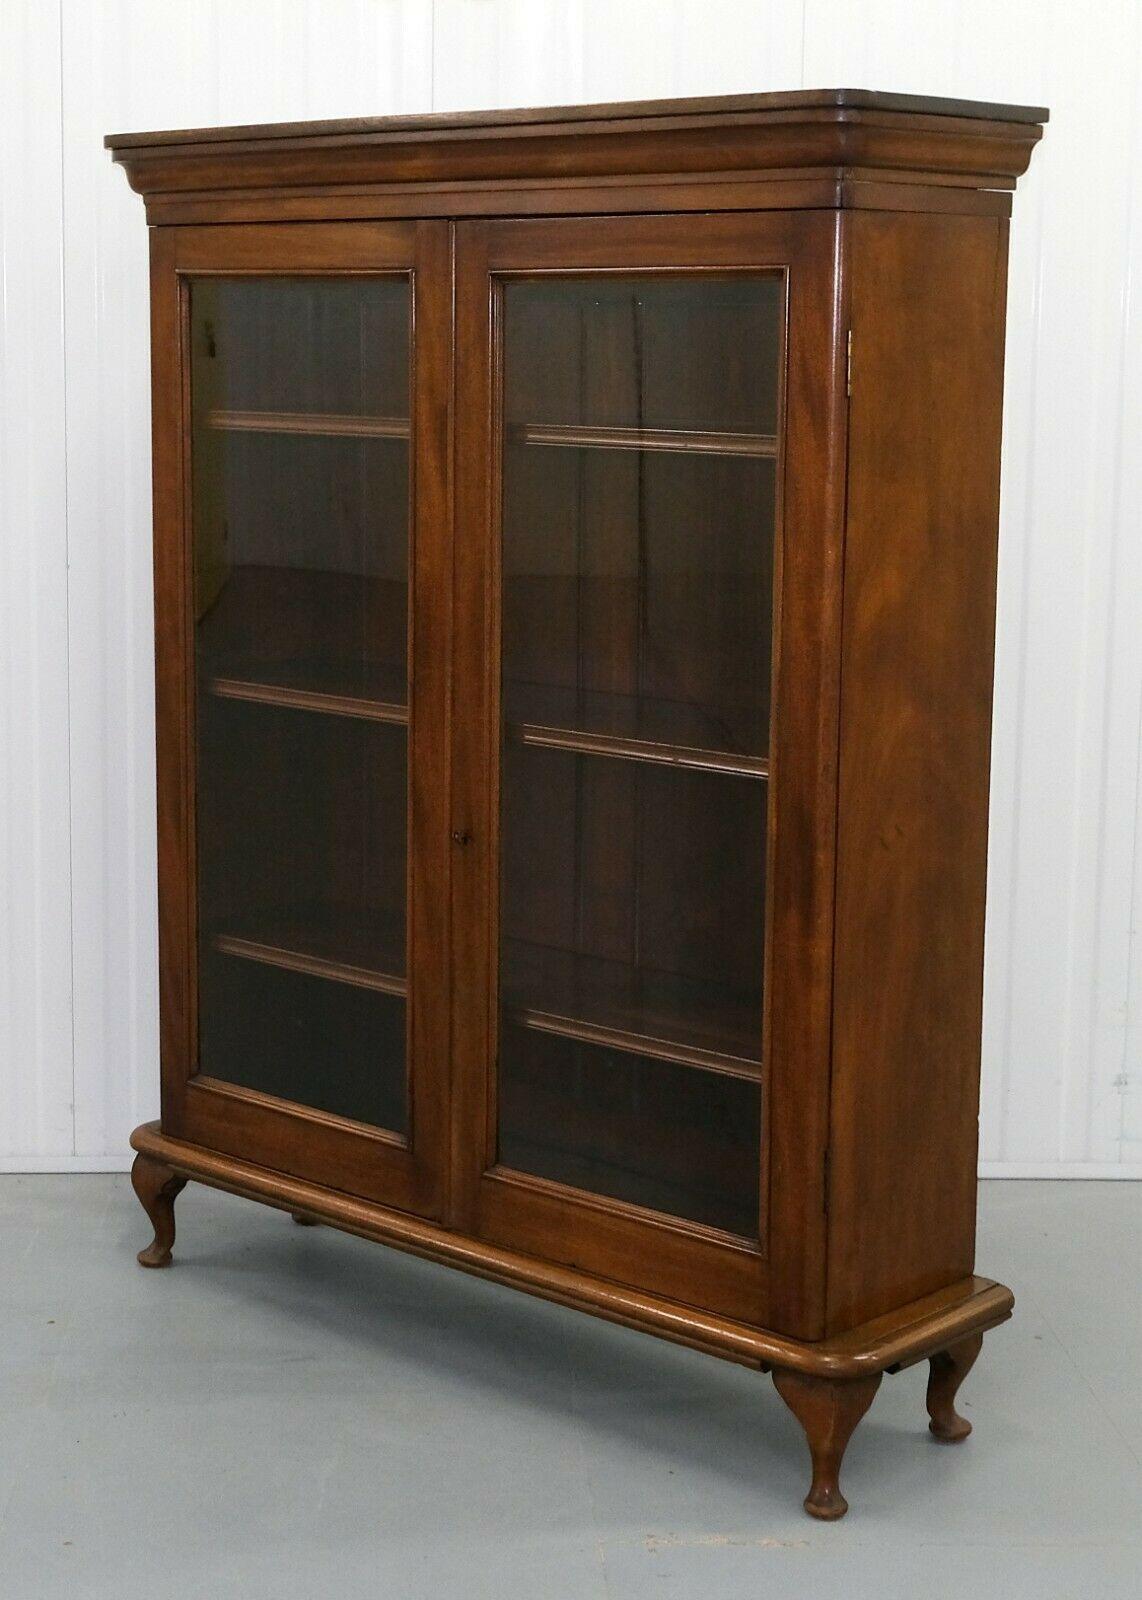 English Rich Brown Hardwood Bookcase Two Doors & Adjustable Shelves on Cabriole Legs